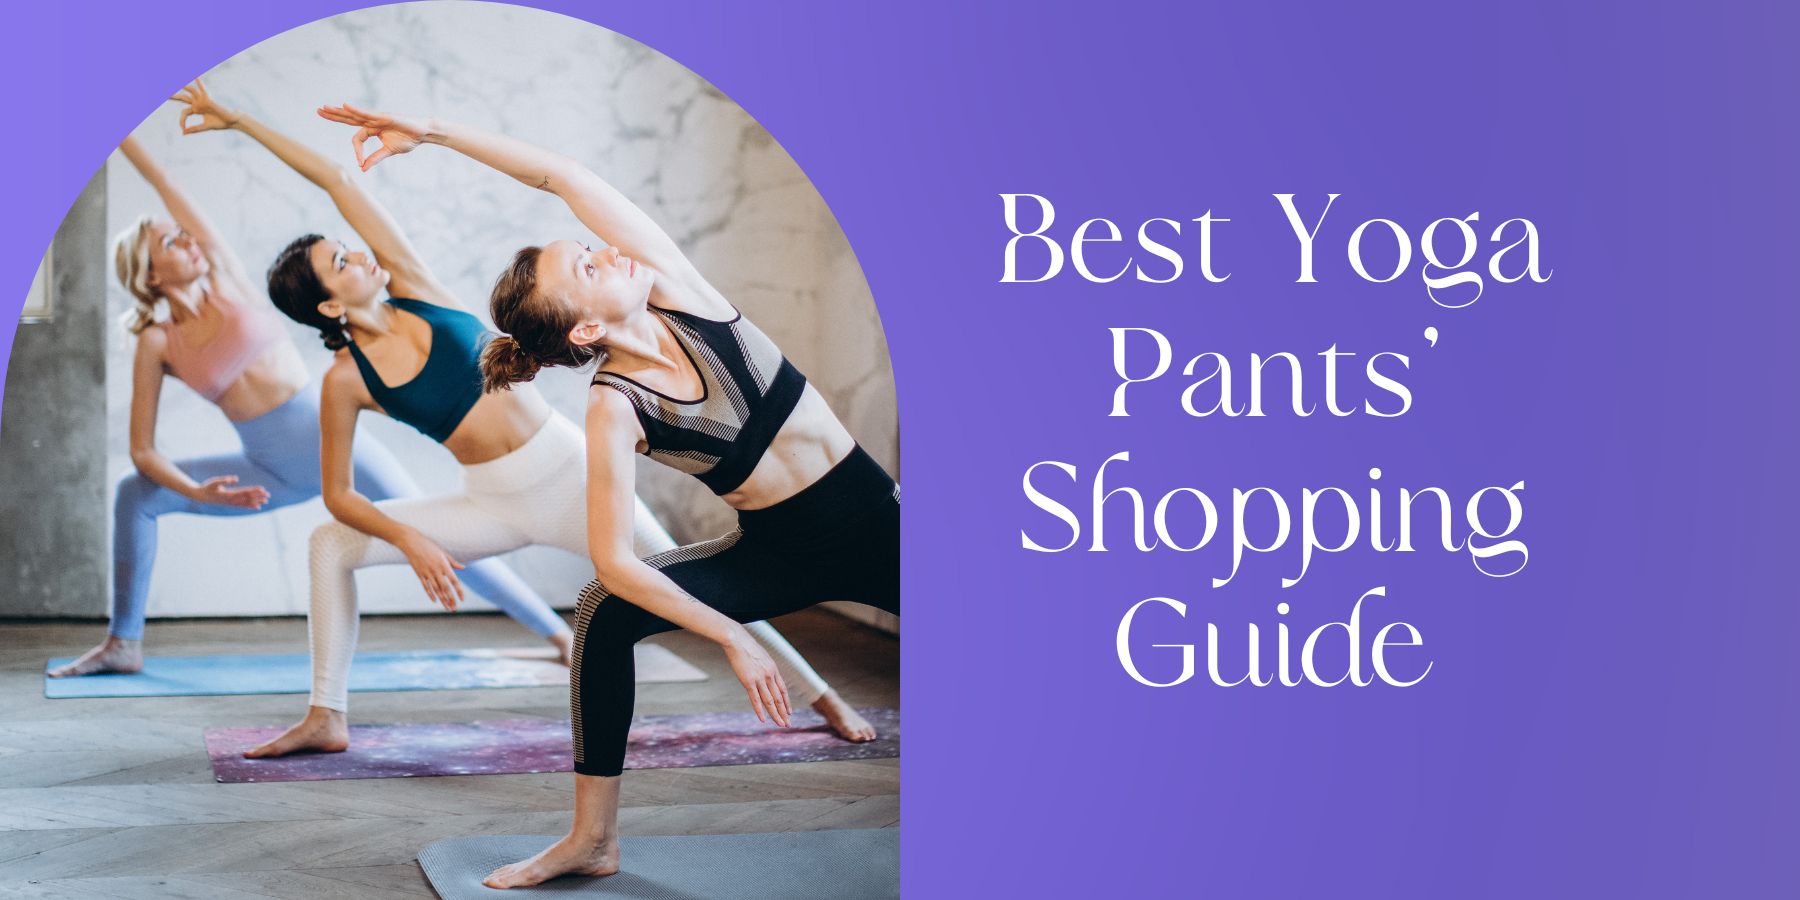 Best Yoga Pants' Shopping Guide - Black Friday Sale Has Already Started!